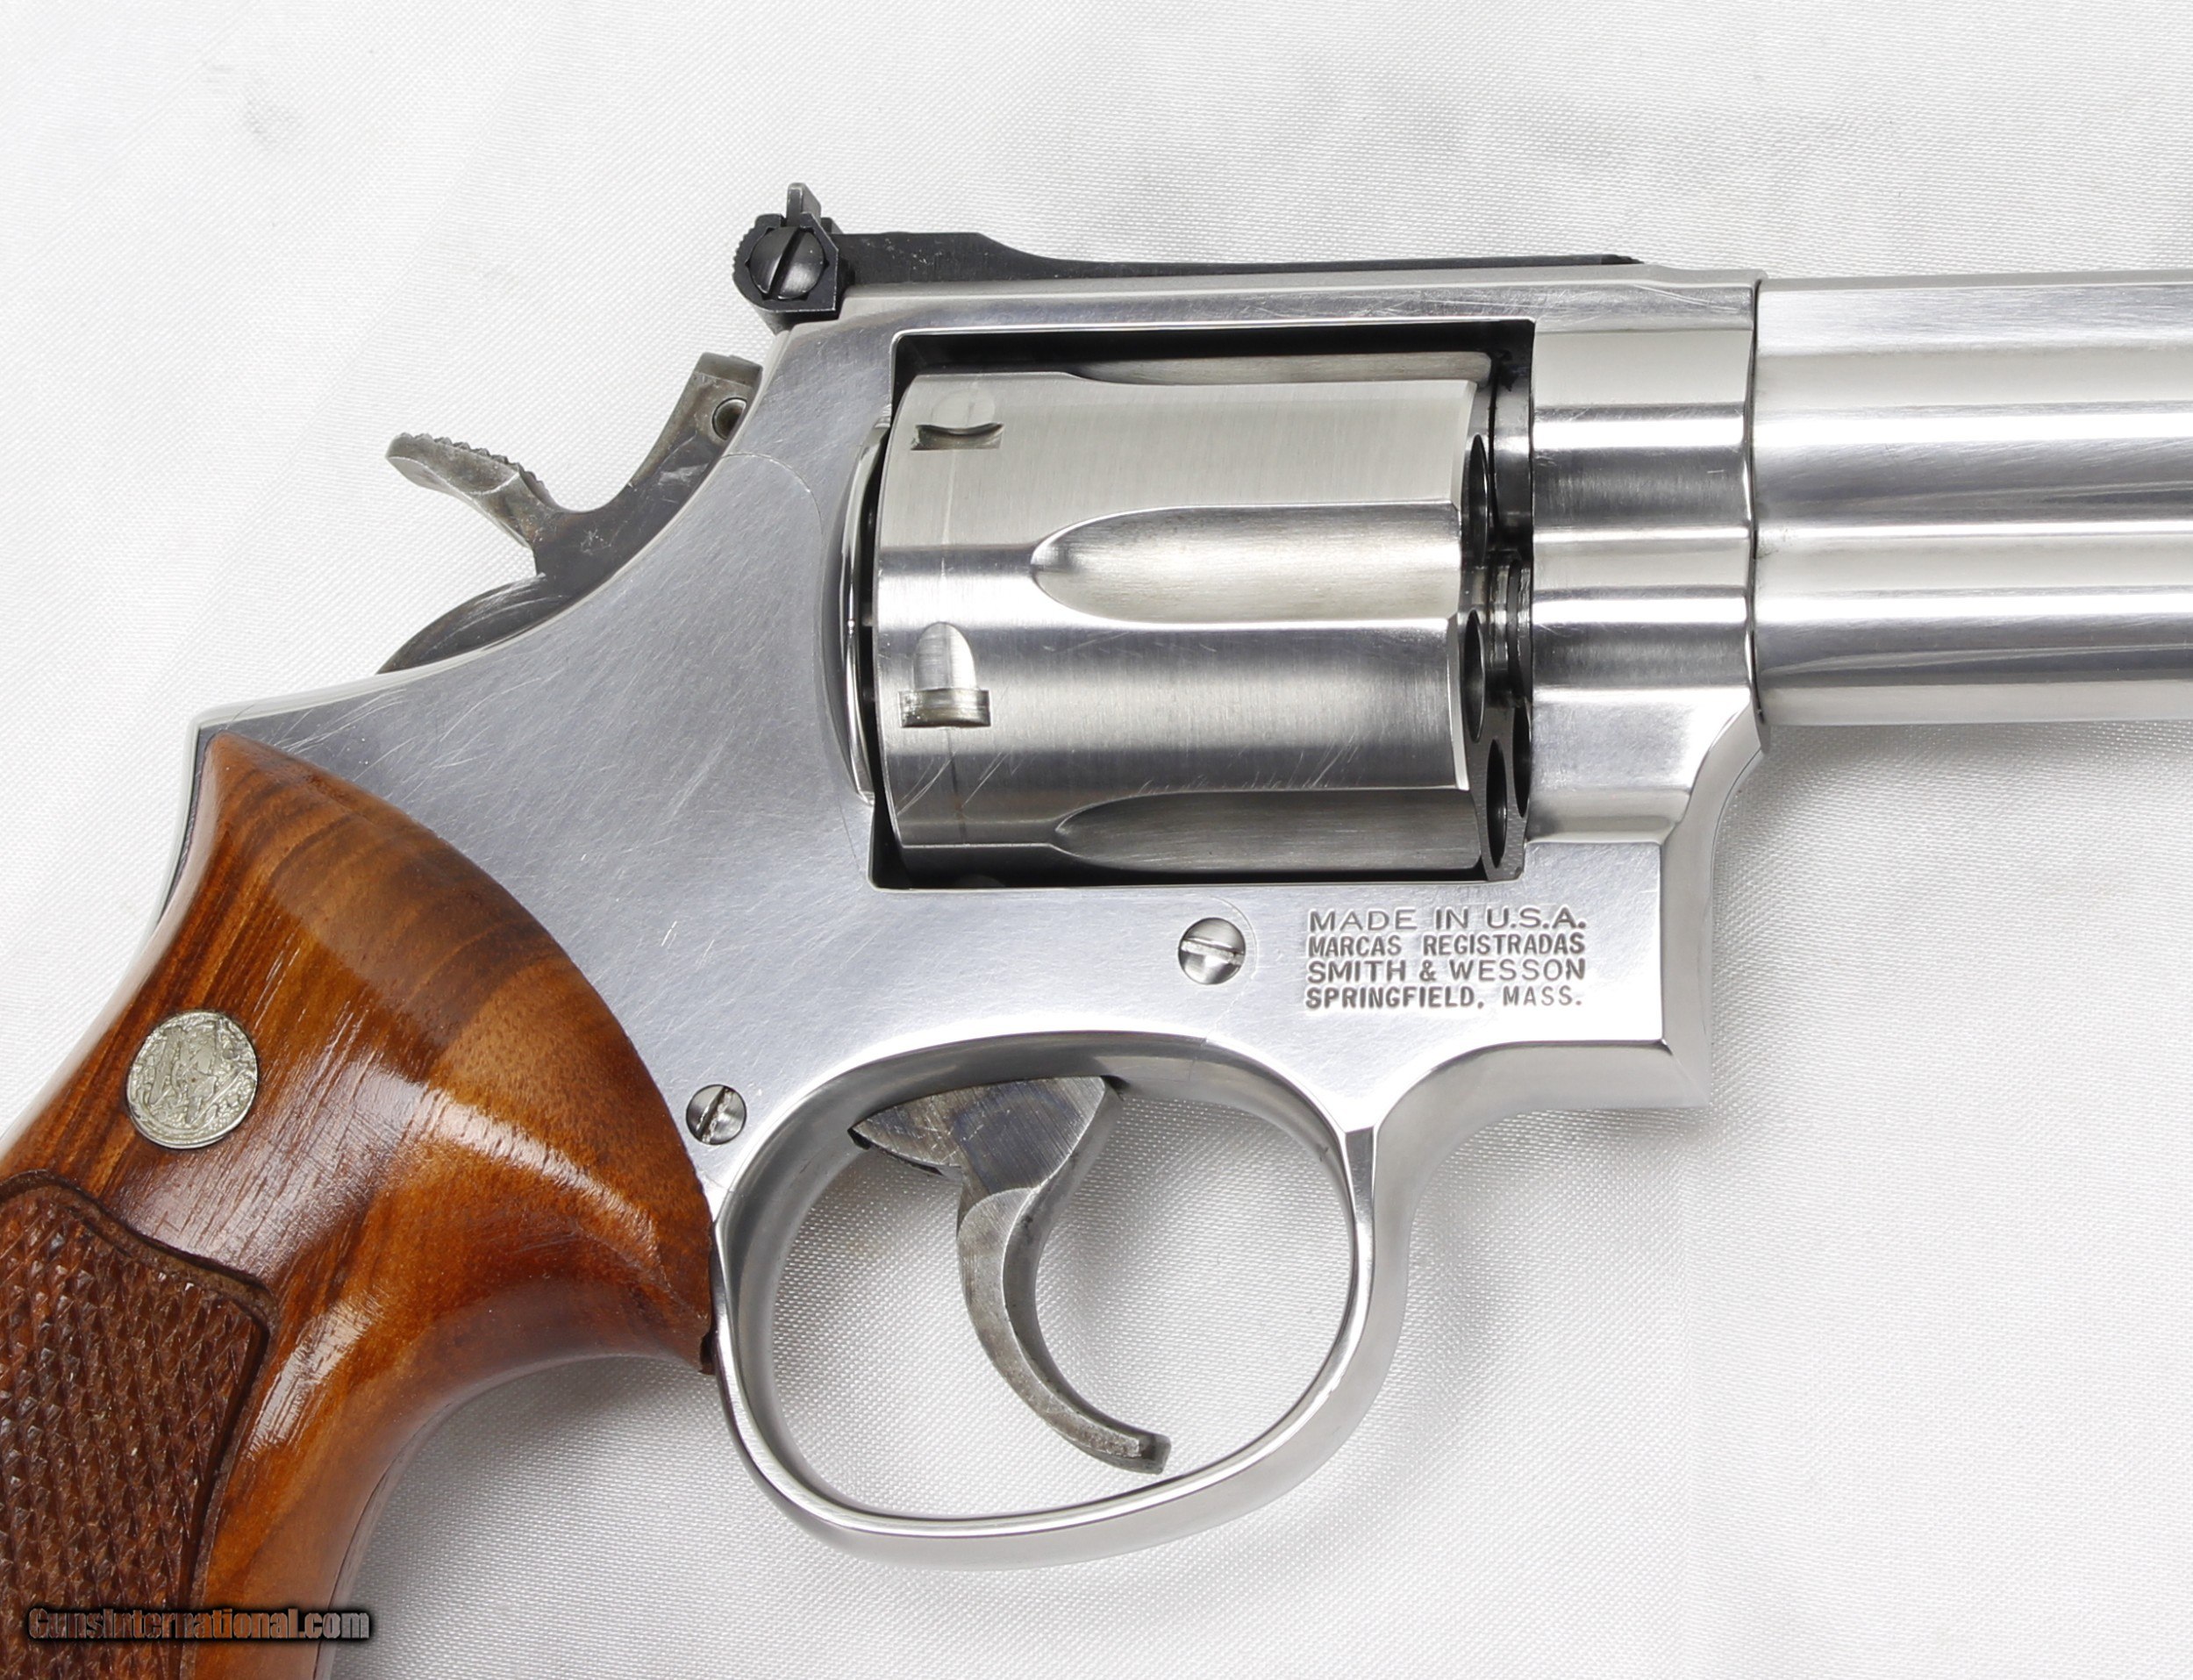 S&W Model 686-4 Revolver .357 Magnum (1993-94) STAINLESS STEEL